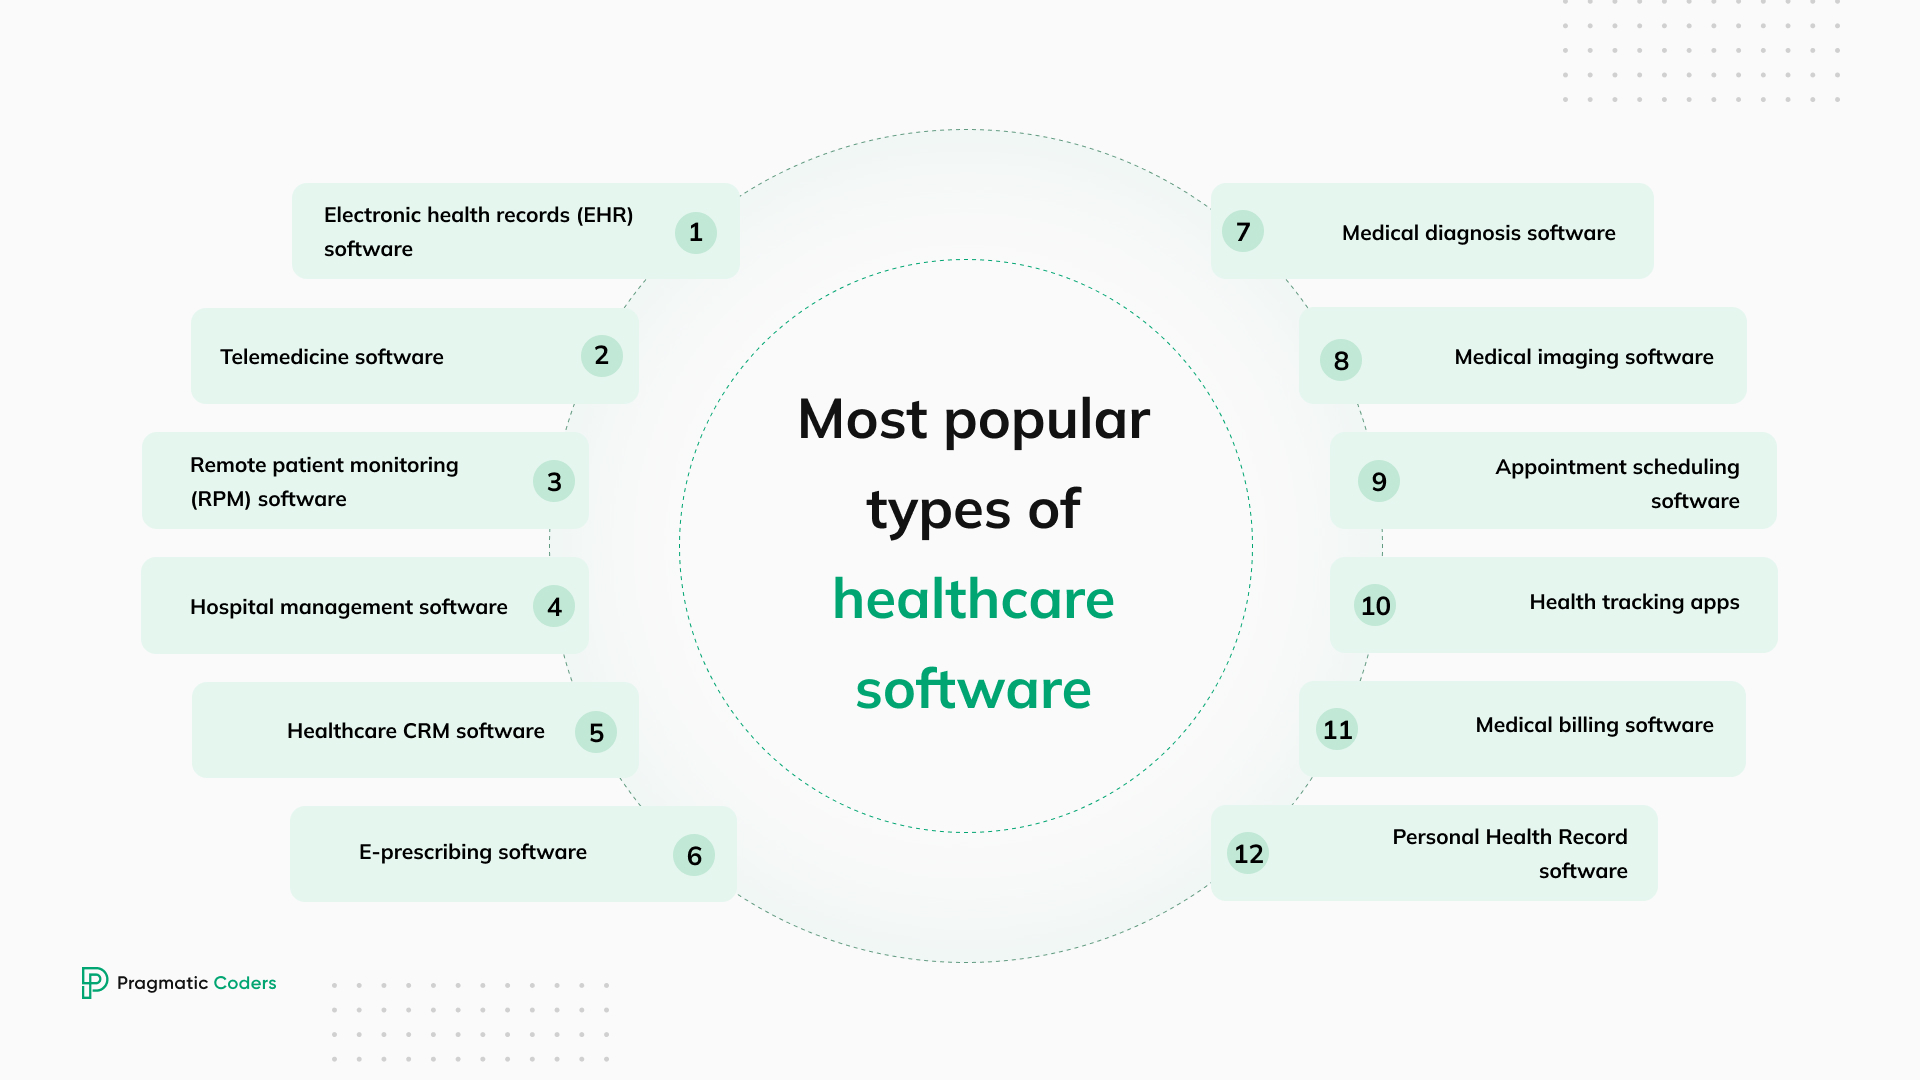 Most popular types of healthcare software (1)